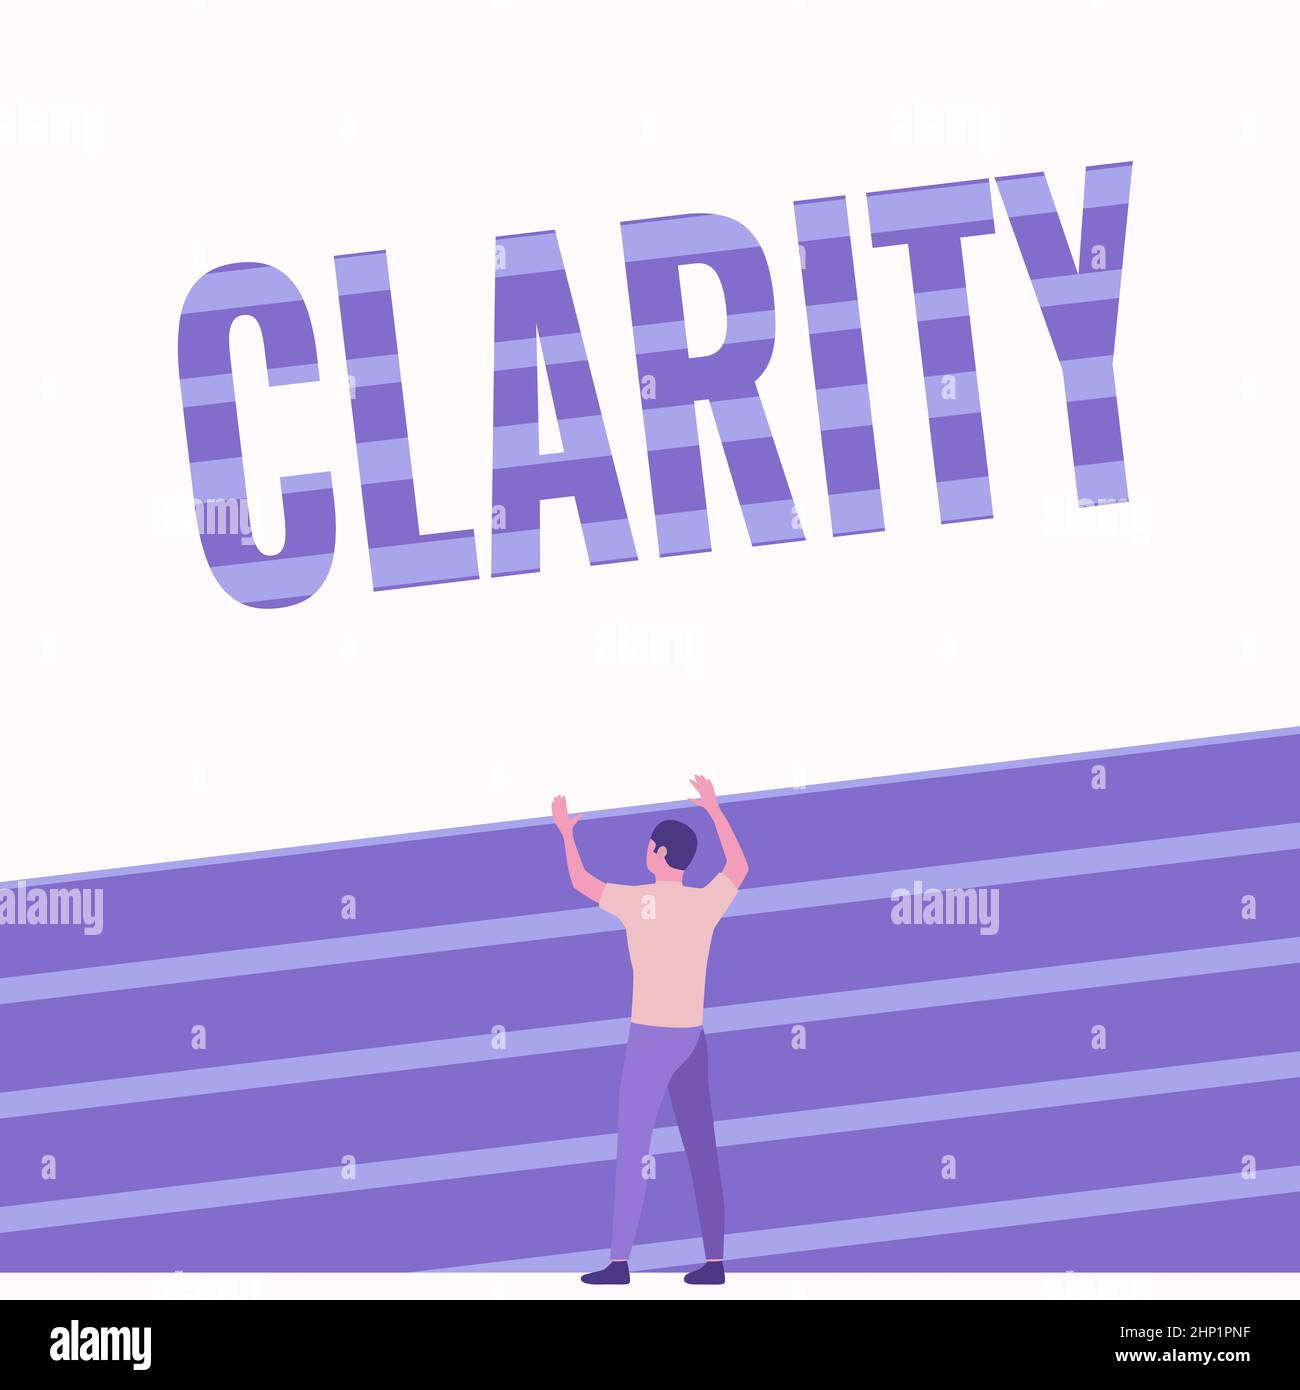 Writing displaying text Clarity, Business idea Being coherent intelligible Understandable Clear ideas Precision Athletic Man Standing On Track Field R Stock Photo